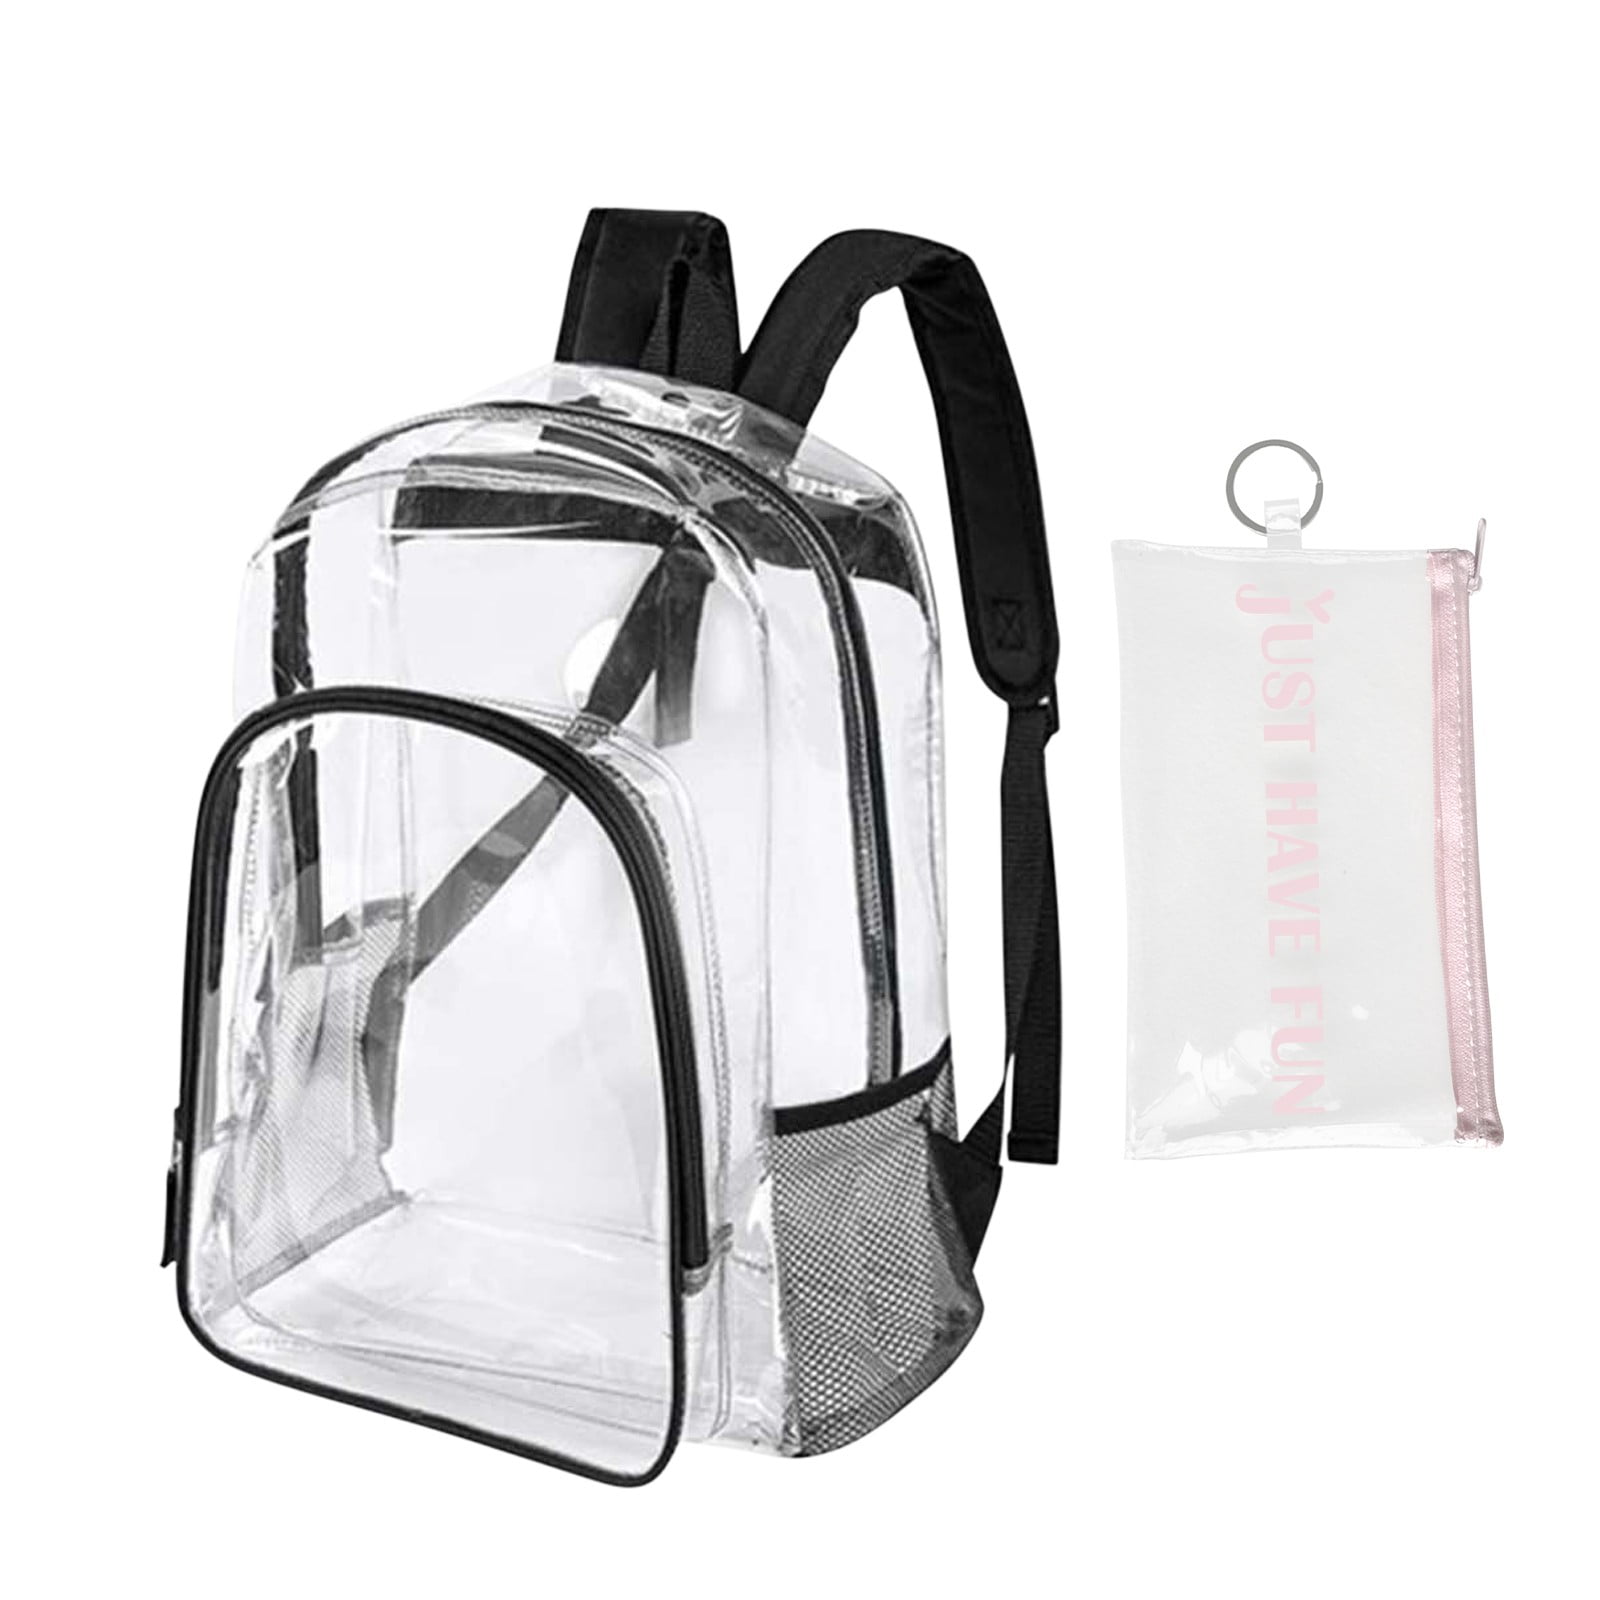  MAY TREE Clear Bag Stadium Approved, Clear Backpack Stadium  Approved for Concert Stadium Festival Sport Work, Clear Sling Bag with  Heavy Duty Material - Black : Clothing, Shoes & Jewelry